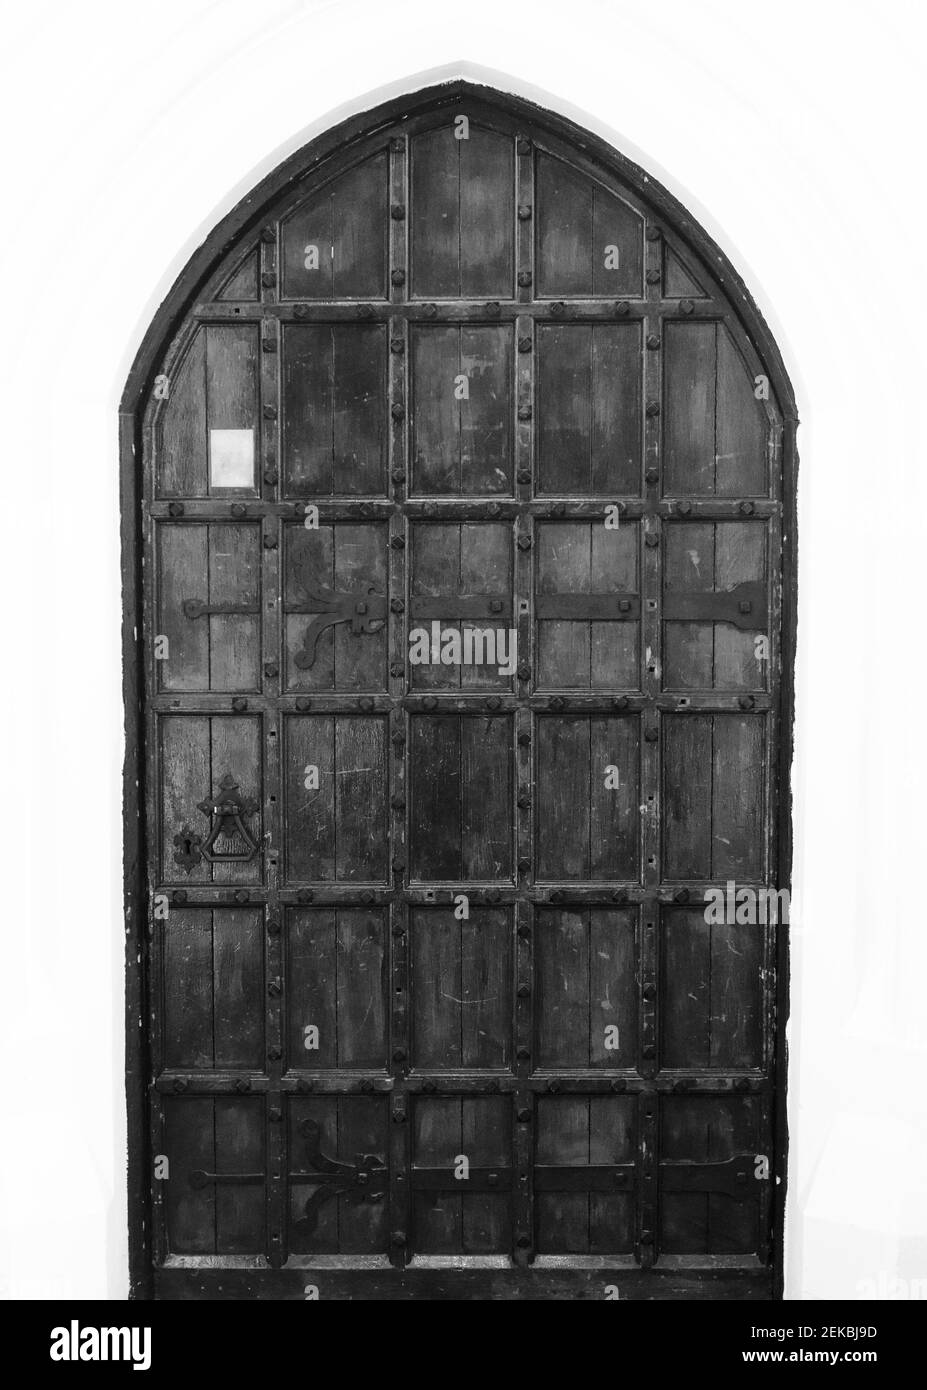 Black and white image of old elizabethan door with metal furniture Stock Photo